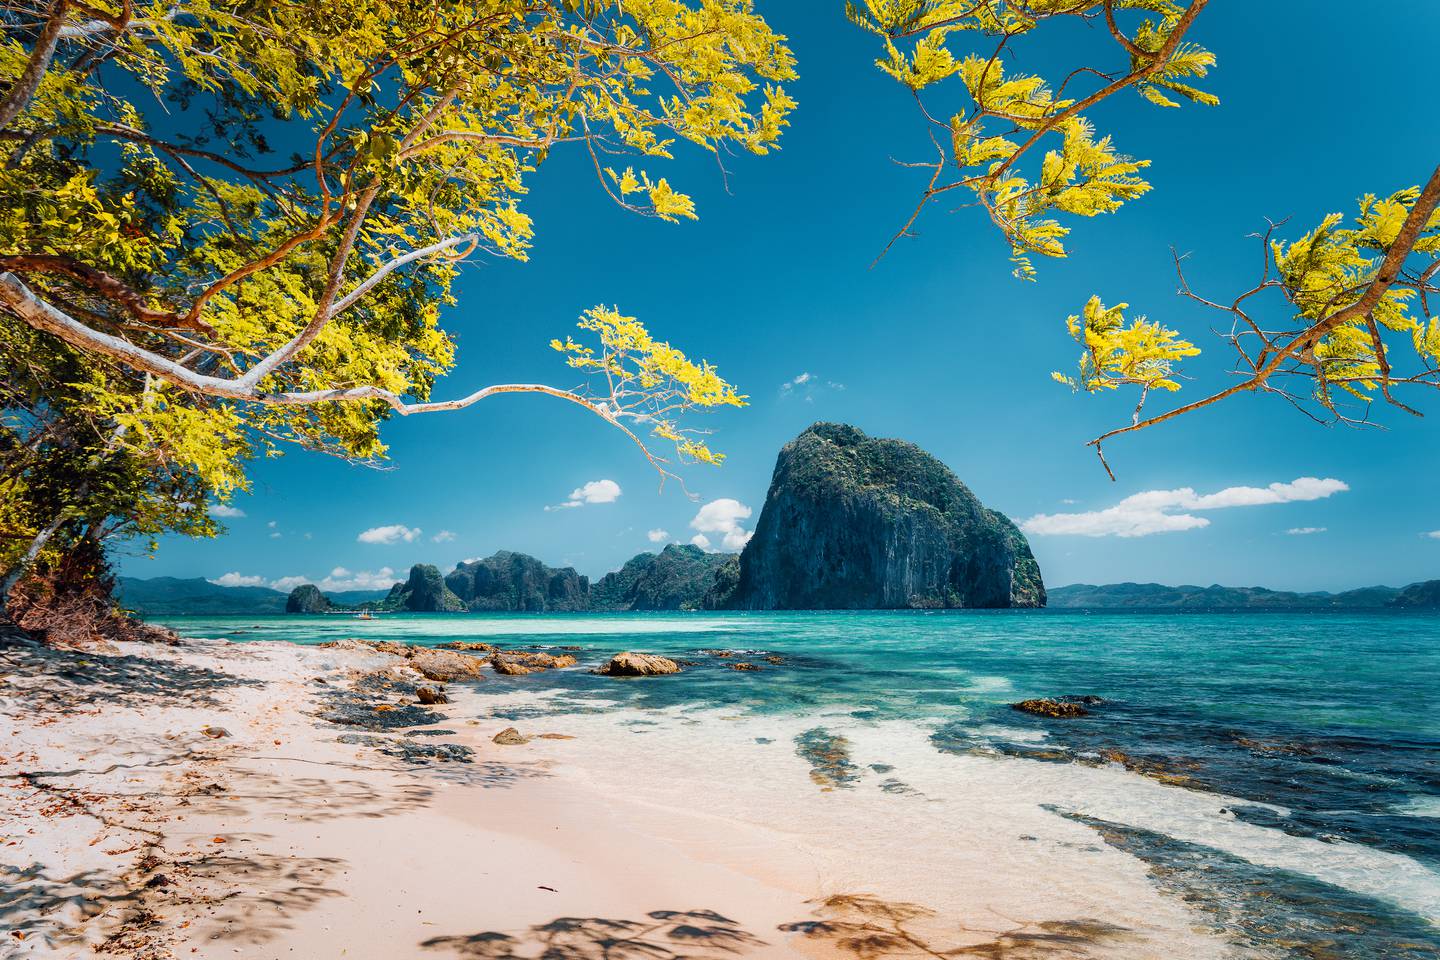 Tourism in the Philippines remains largely restricted to domestic travellers as tourist visas remain suspended. Photo: Explorar Hotels & Resorts